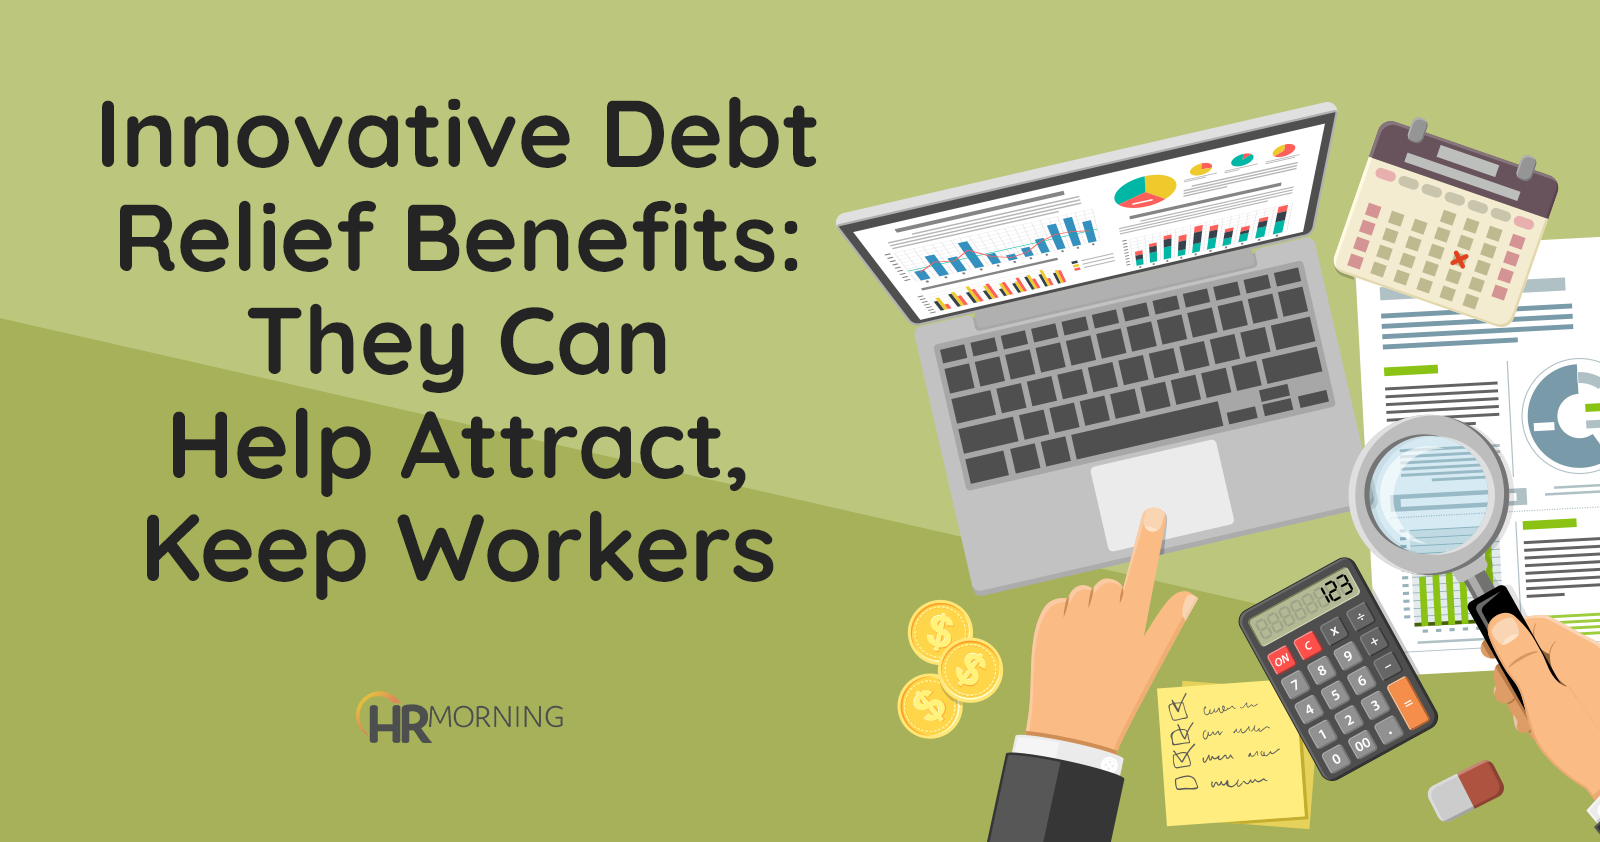 Innovative debt relief benefits: They can help attract, keep workers |  HRMorning